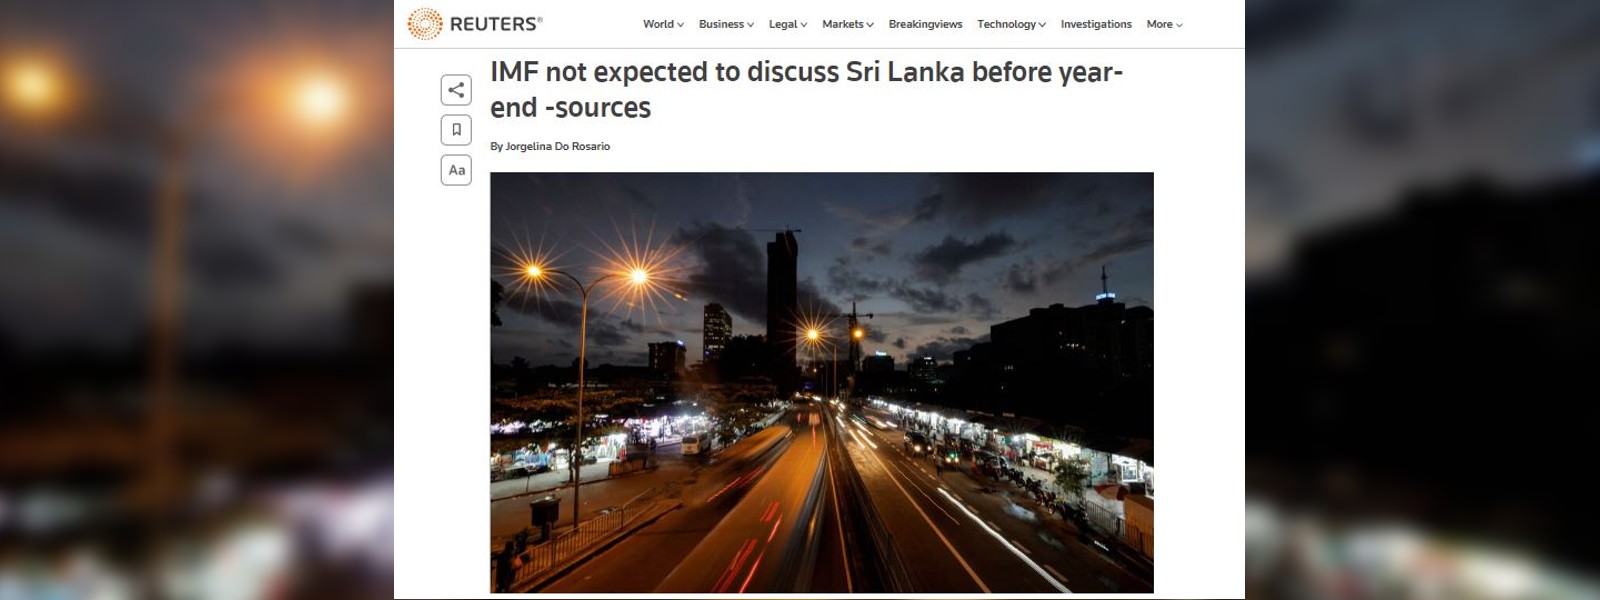 IMF not expected to discuss Sri Lanka before 2022